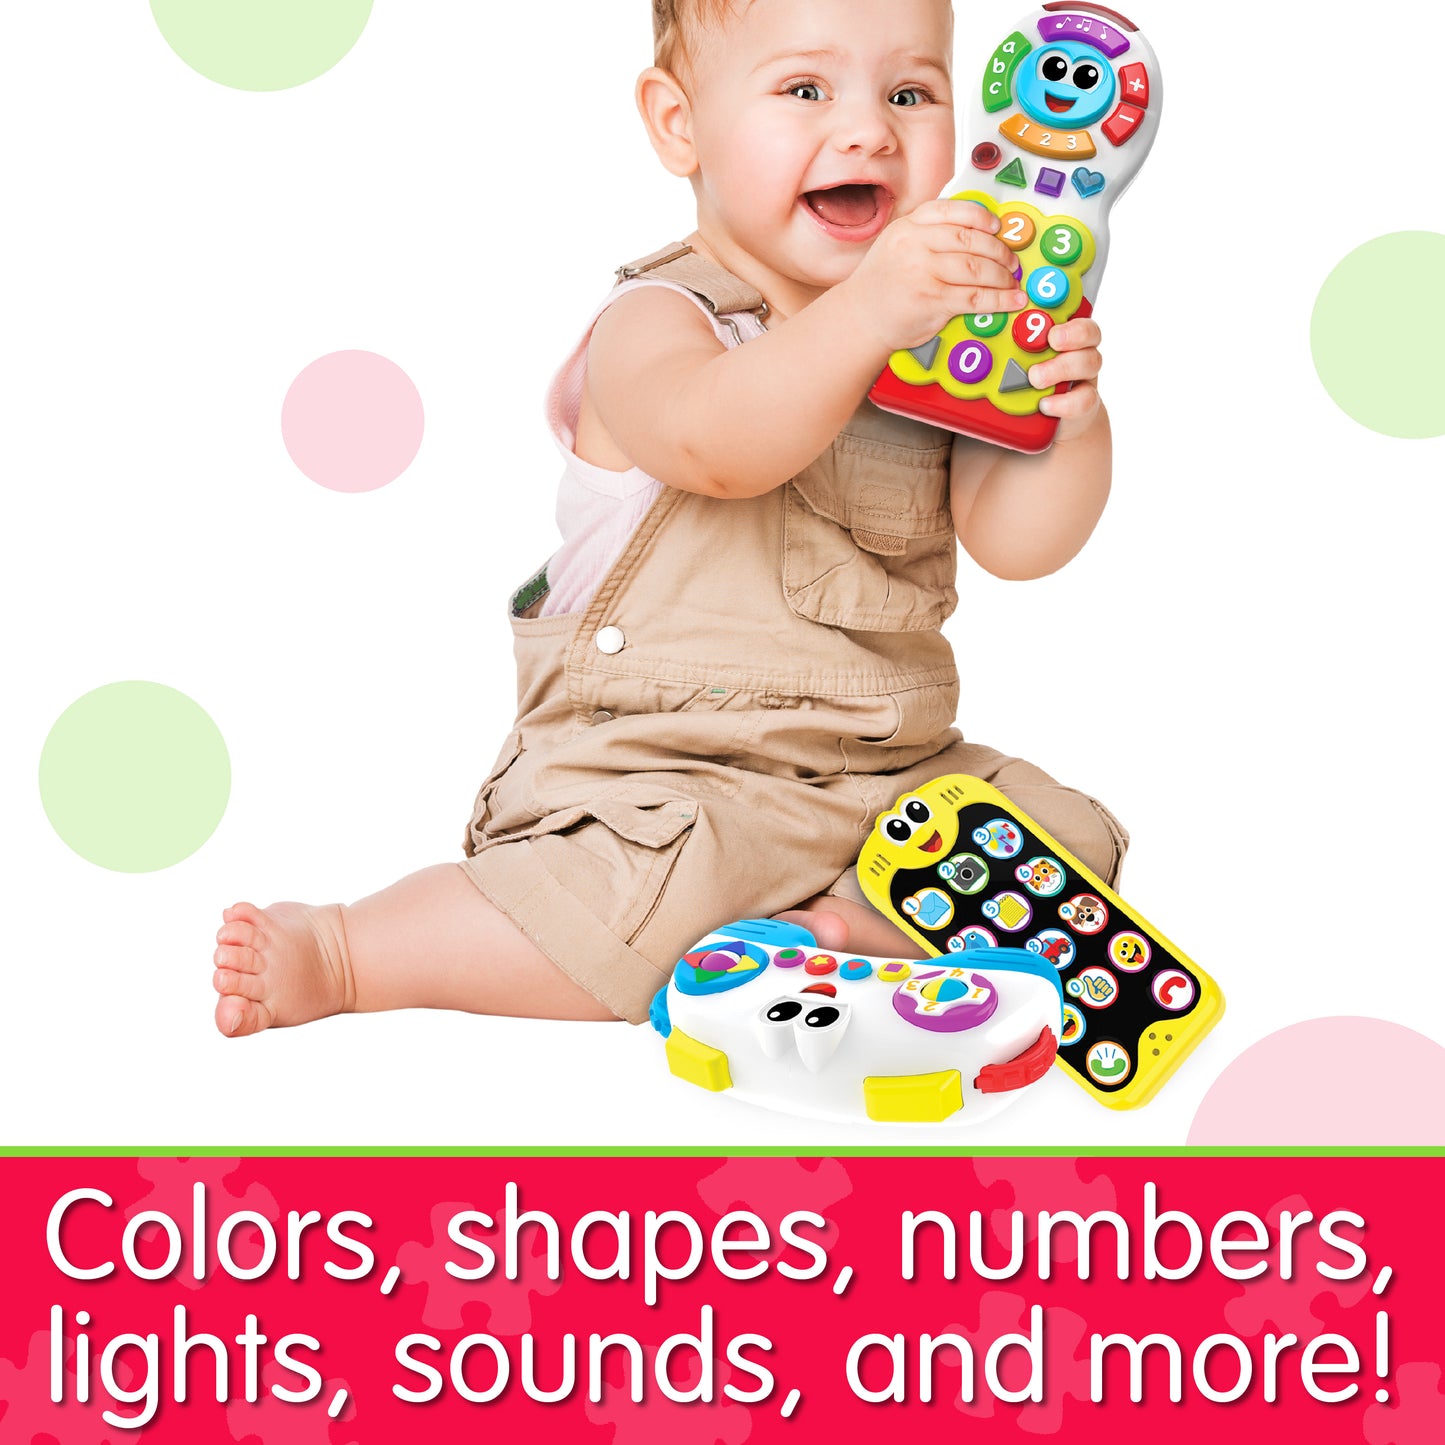 Infographic with baby playing with On The Go 3 Pack Set that says, "Colors, shapes, numbers, lights, sounds, and more!"